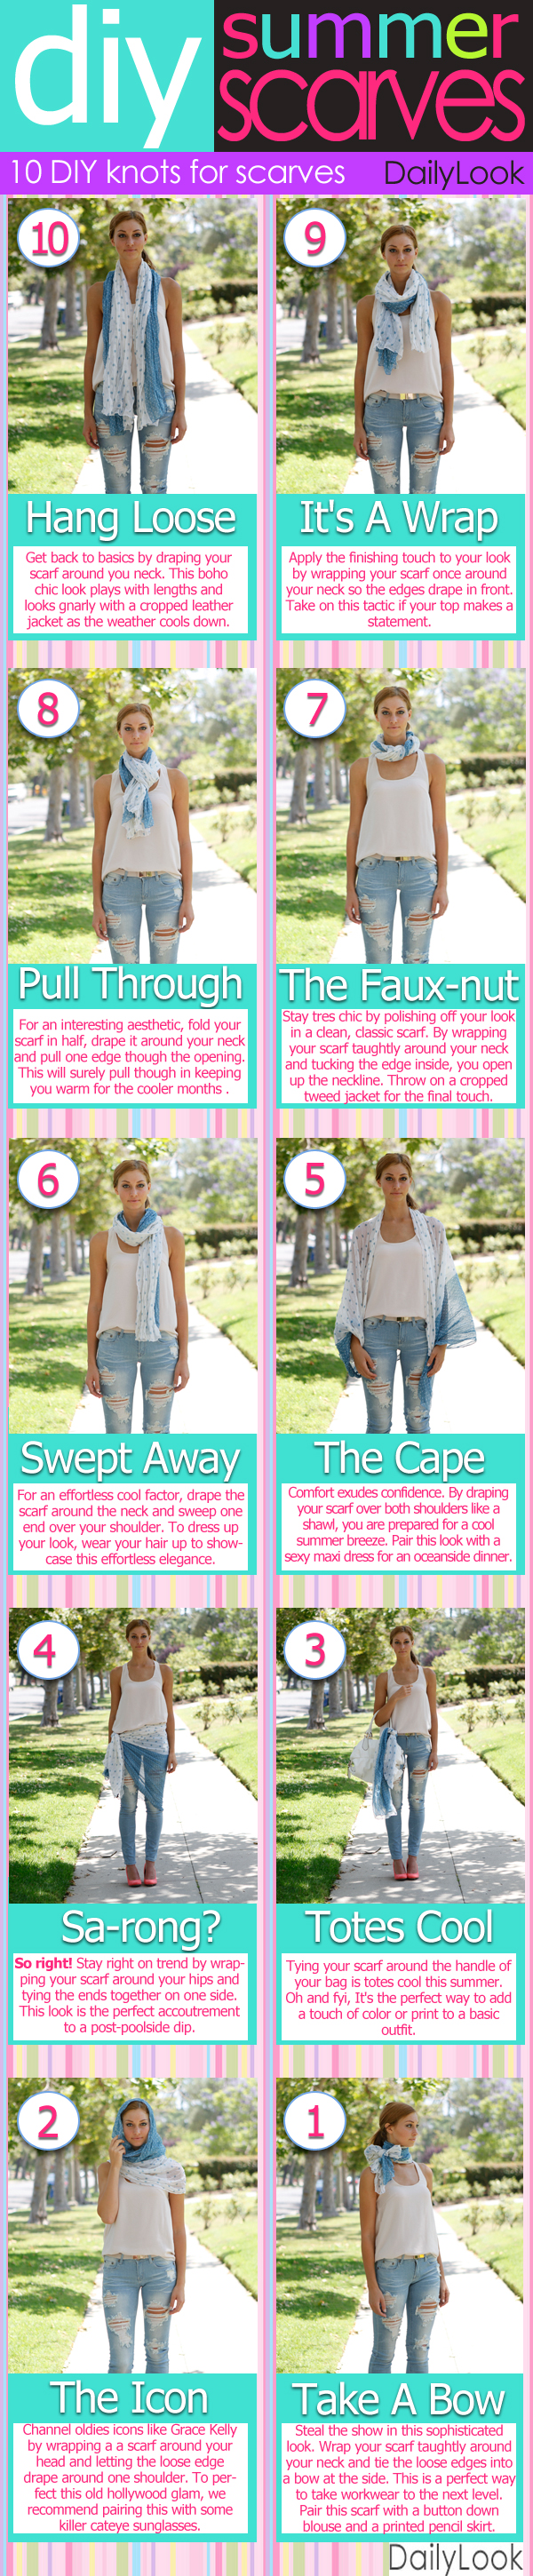 10 ways to wear a scarf for summer